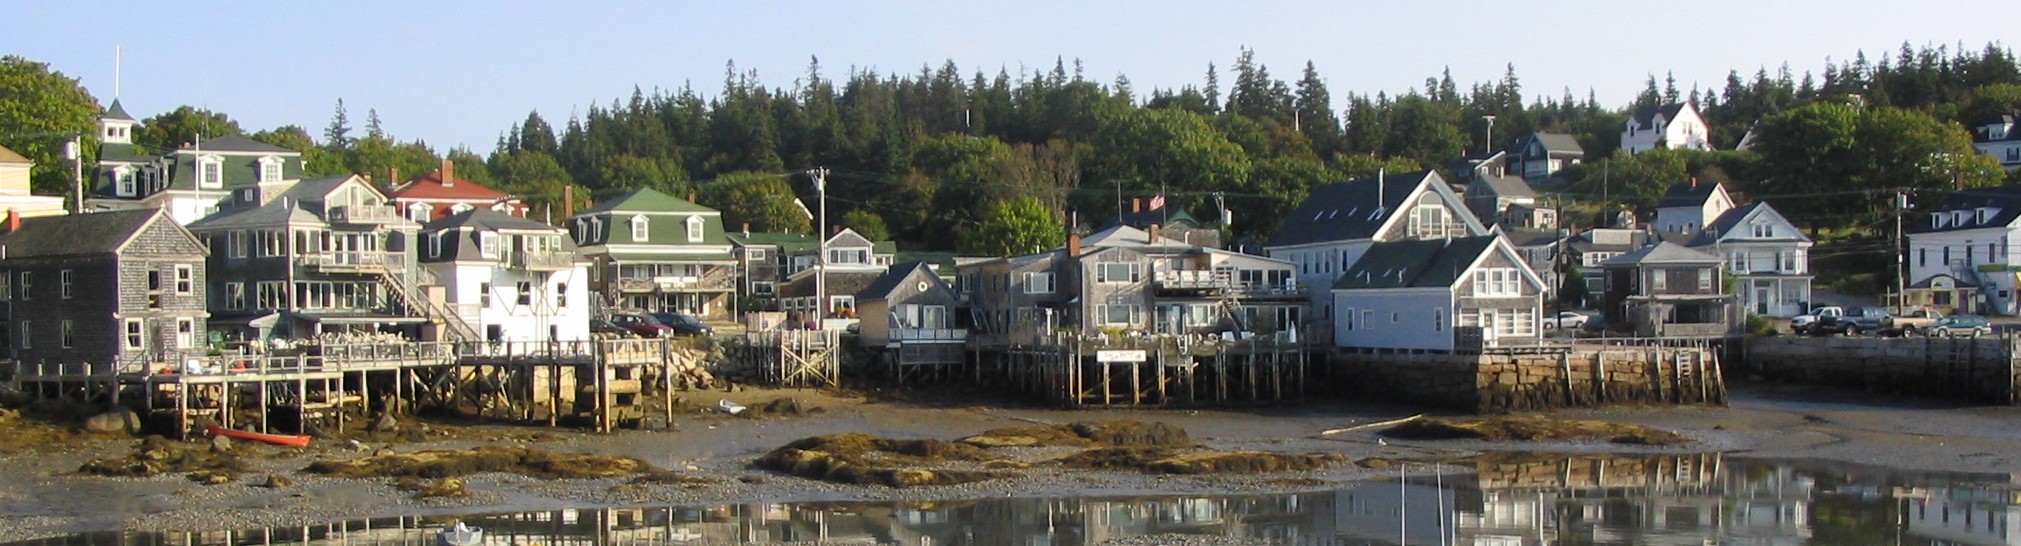 community along the waterfront